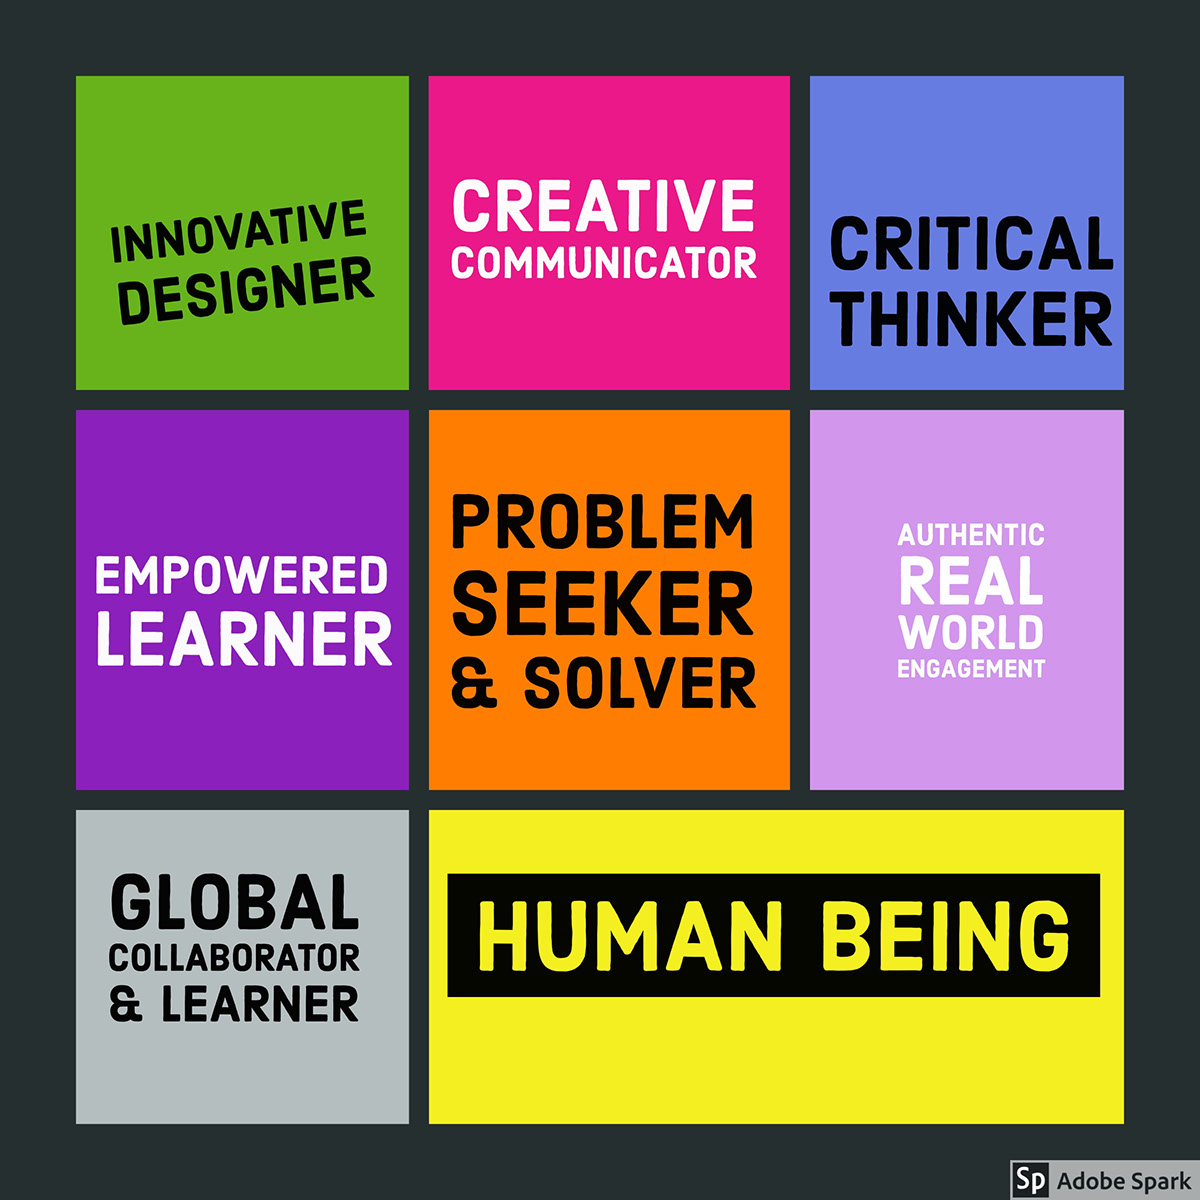 Human being Human being<P>Problem Seeker & Solver<P>Critical Thinker<P>Innovative Designer<P>Empowered Learner<P>Creative Communicator<P>Global Collaborator & Learner<BR><P>Authentic real world engagement